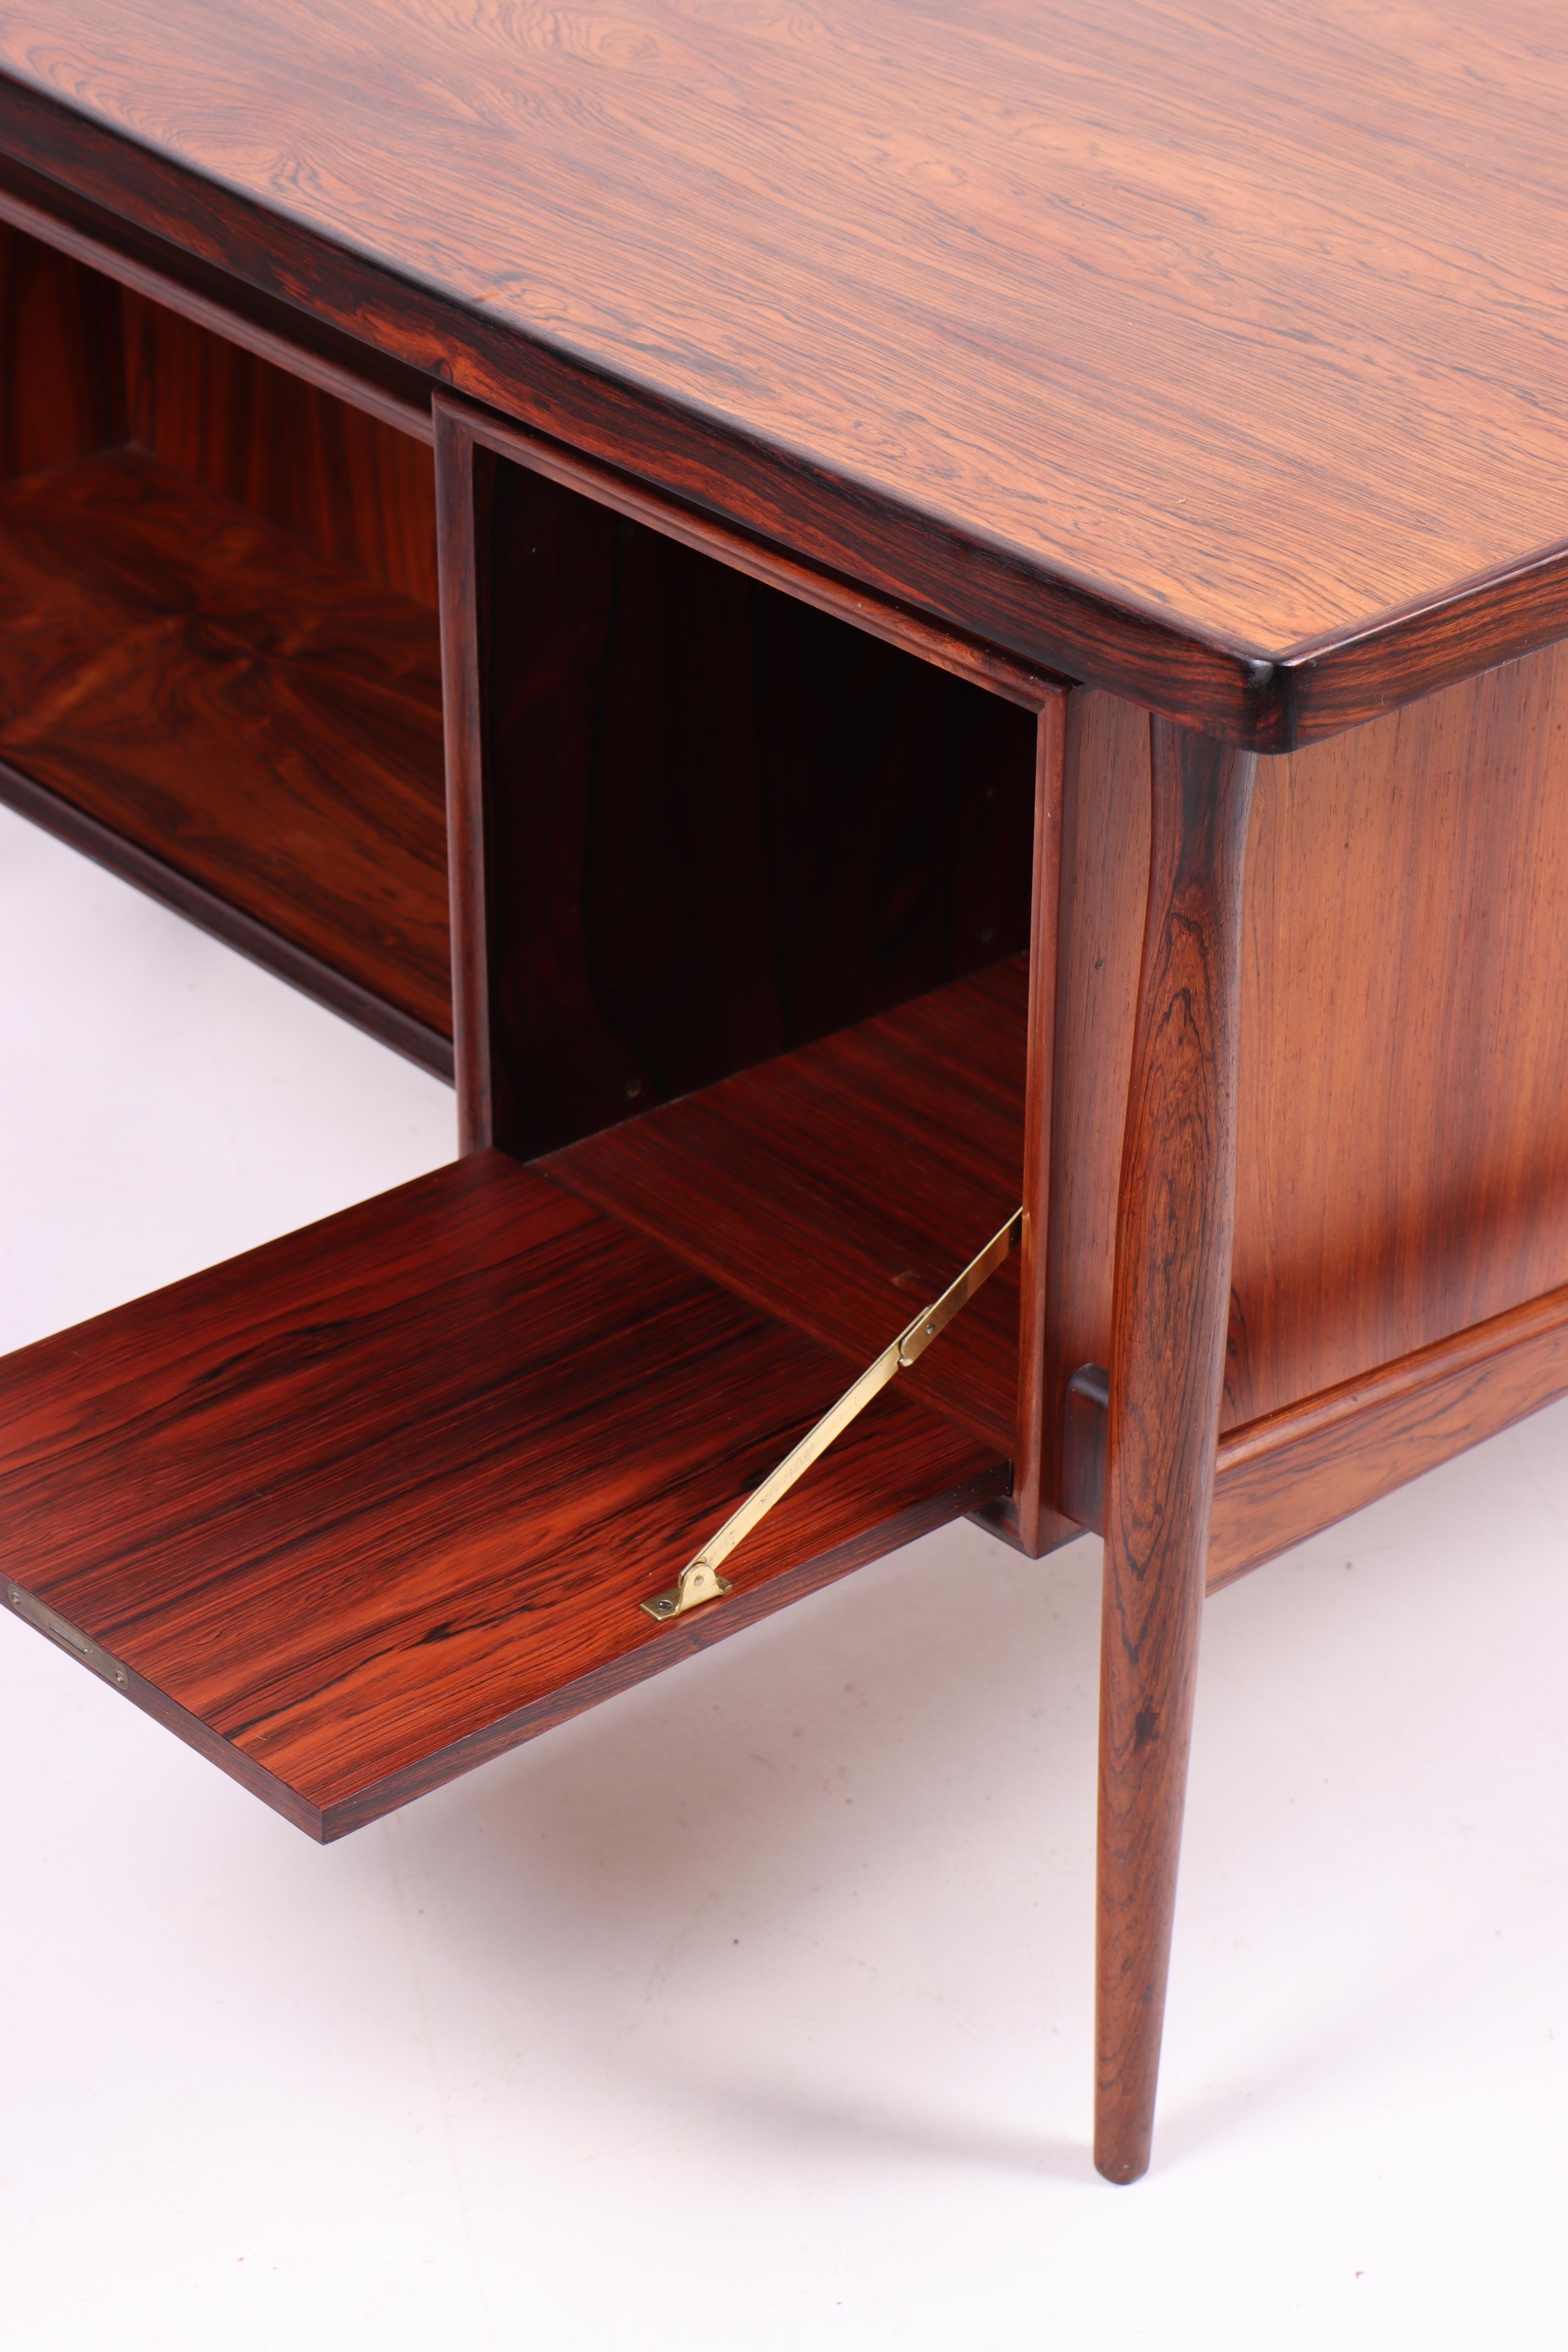 Midcentury Desk in Rosewood, Made in Denmark 1960s For Sale 8